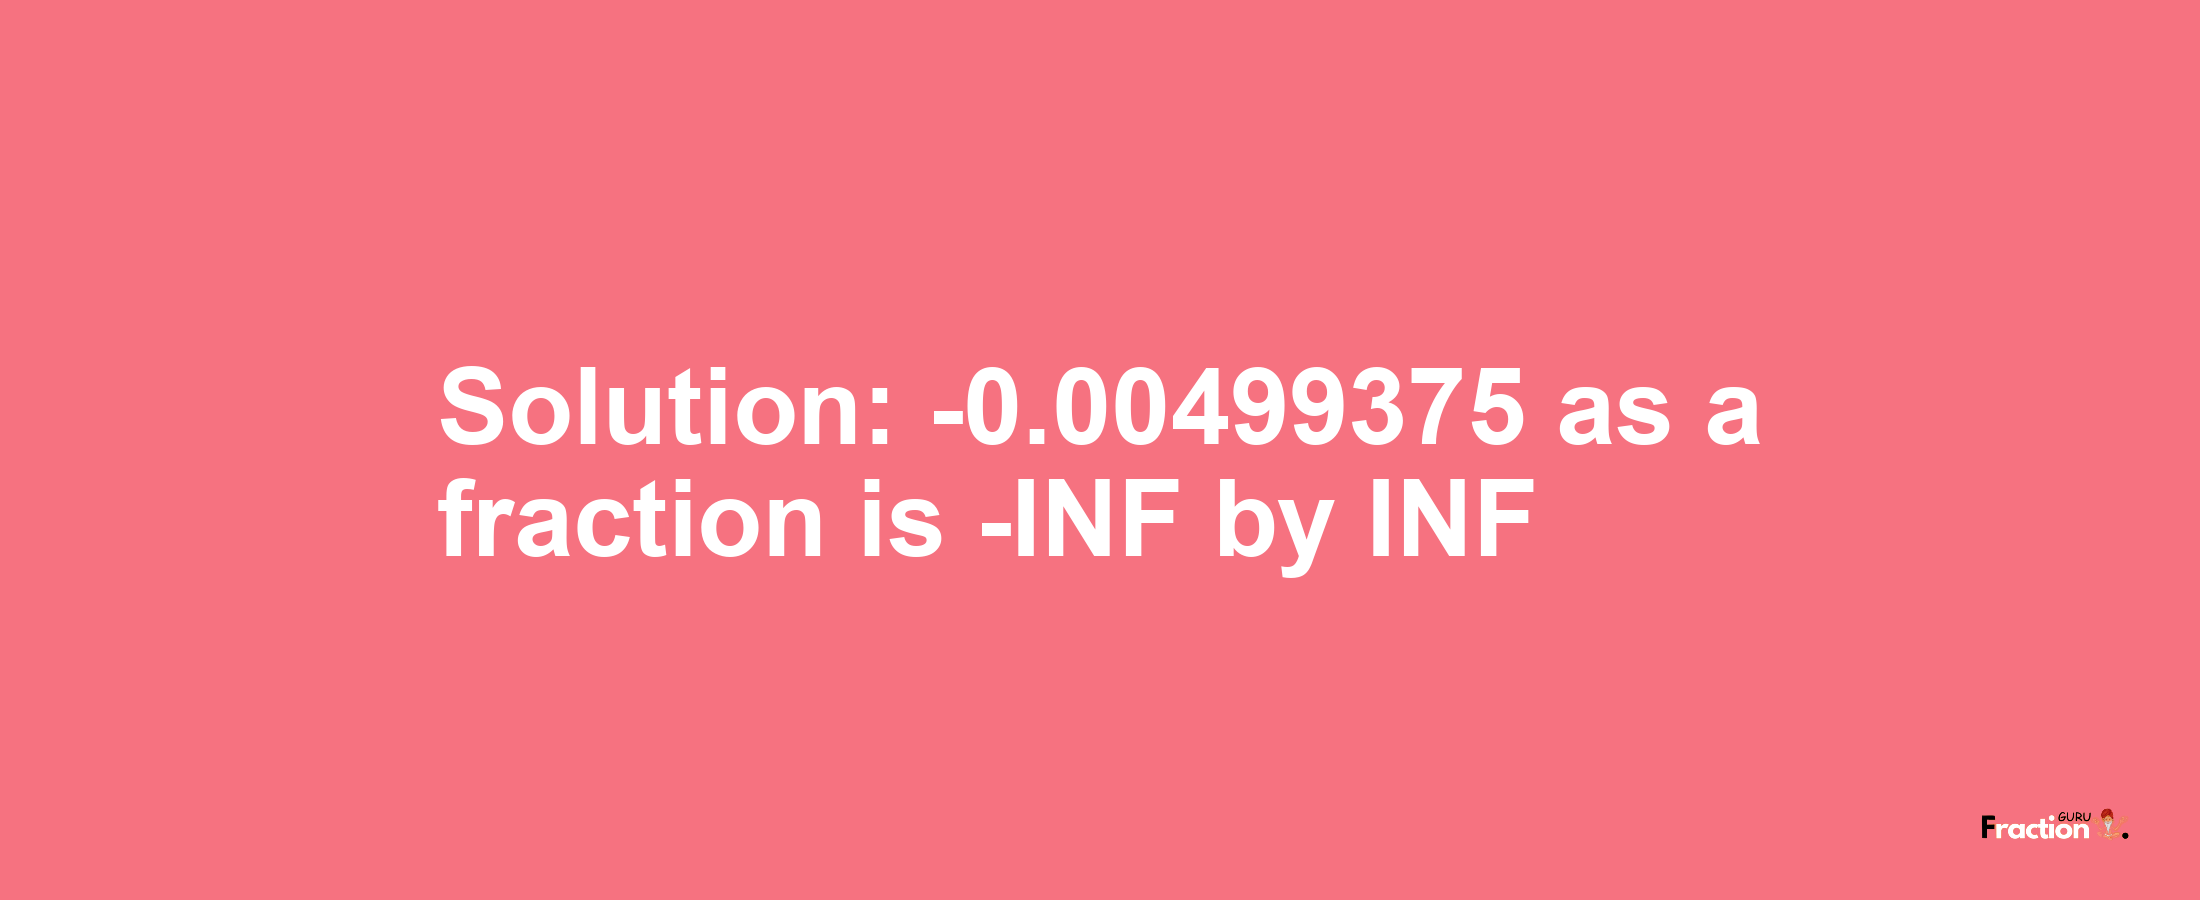 Solution:-0.00499375 as a fraction is -INF/INF